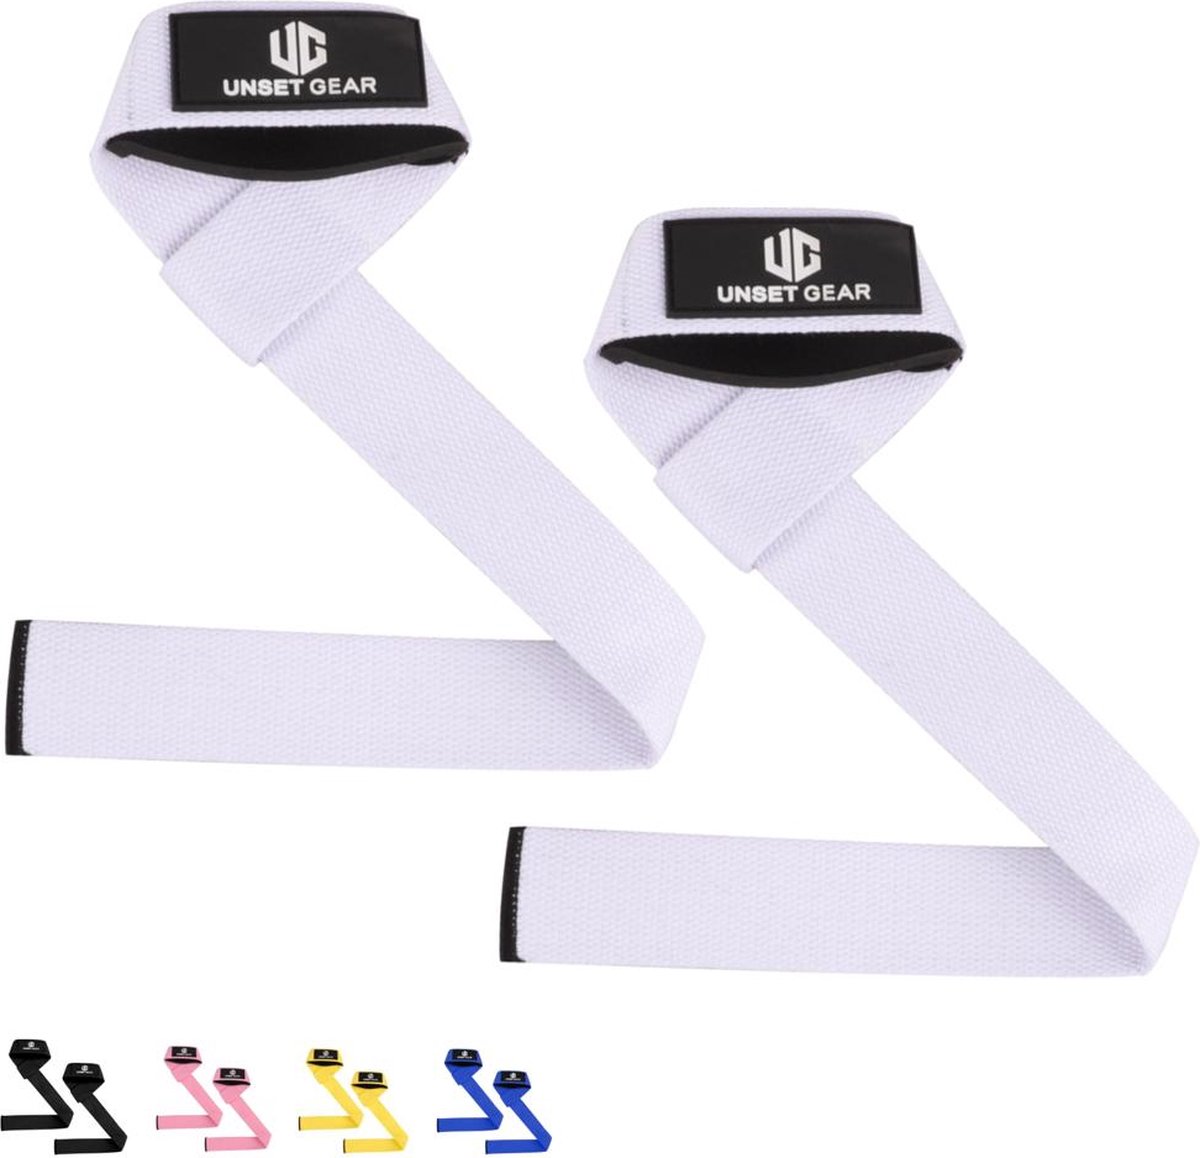 Unset Gear - Lifting straps - Wit - Fitness - Powerliften - Extra grip - Bodybuilding